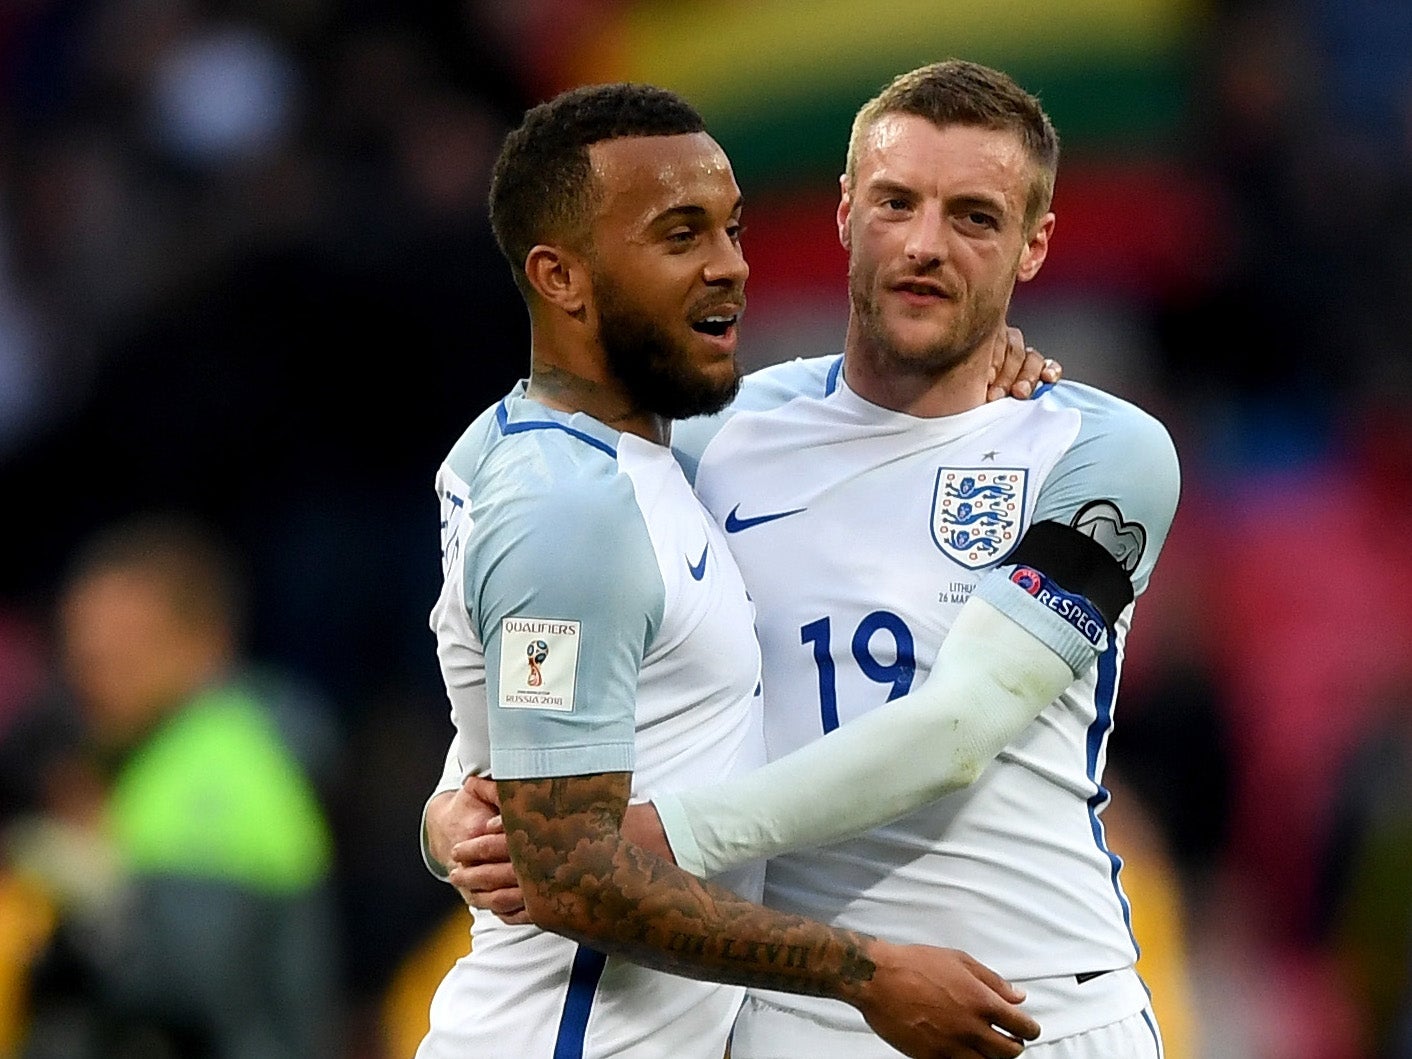 Vardy's black eye was very noticeable at Wembley